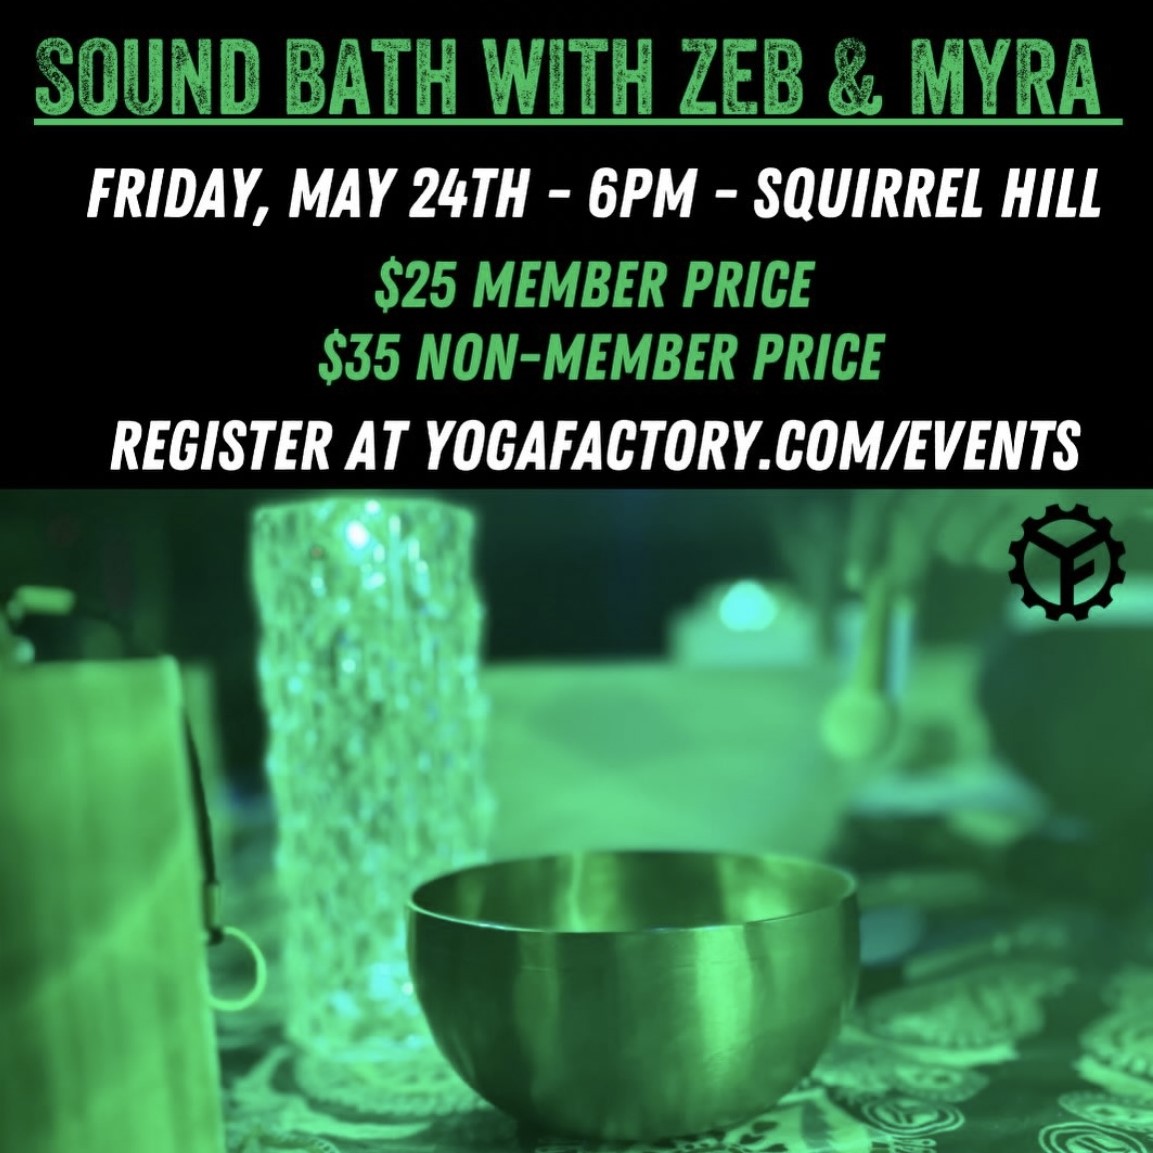 A graphic about Yoga Factory's upcoming Sound Bath event.
"Sound bath with Zeb & Myra. Friday, May 24th - 6pm - Squirrel Hill. $25 Member Price, $35 Non-Member Price. Register at YogaFactory.com/Events."